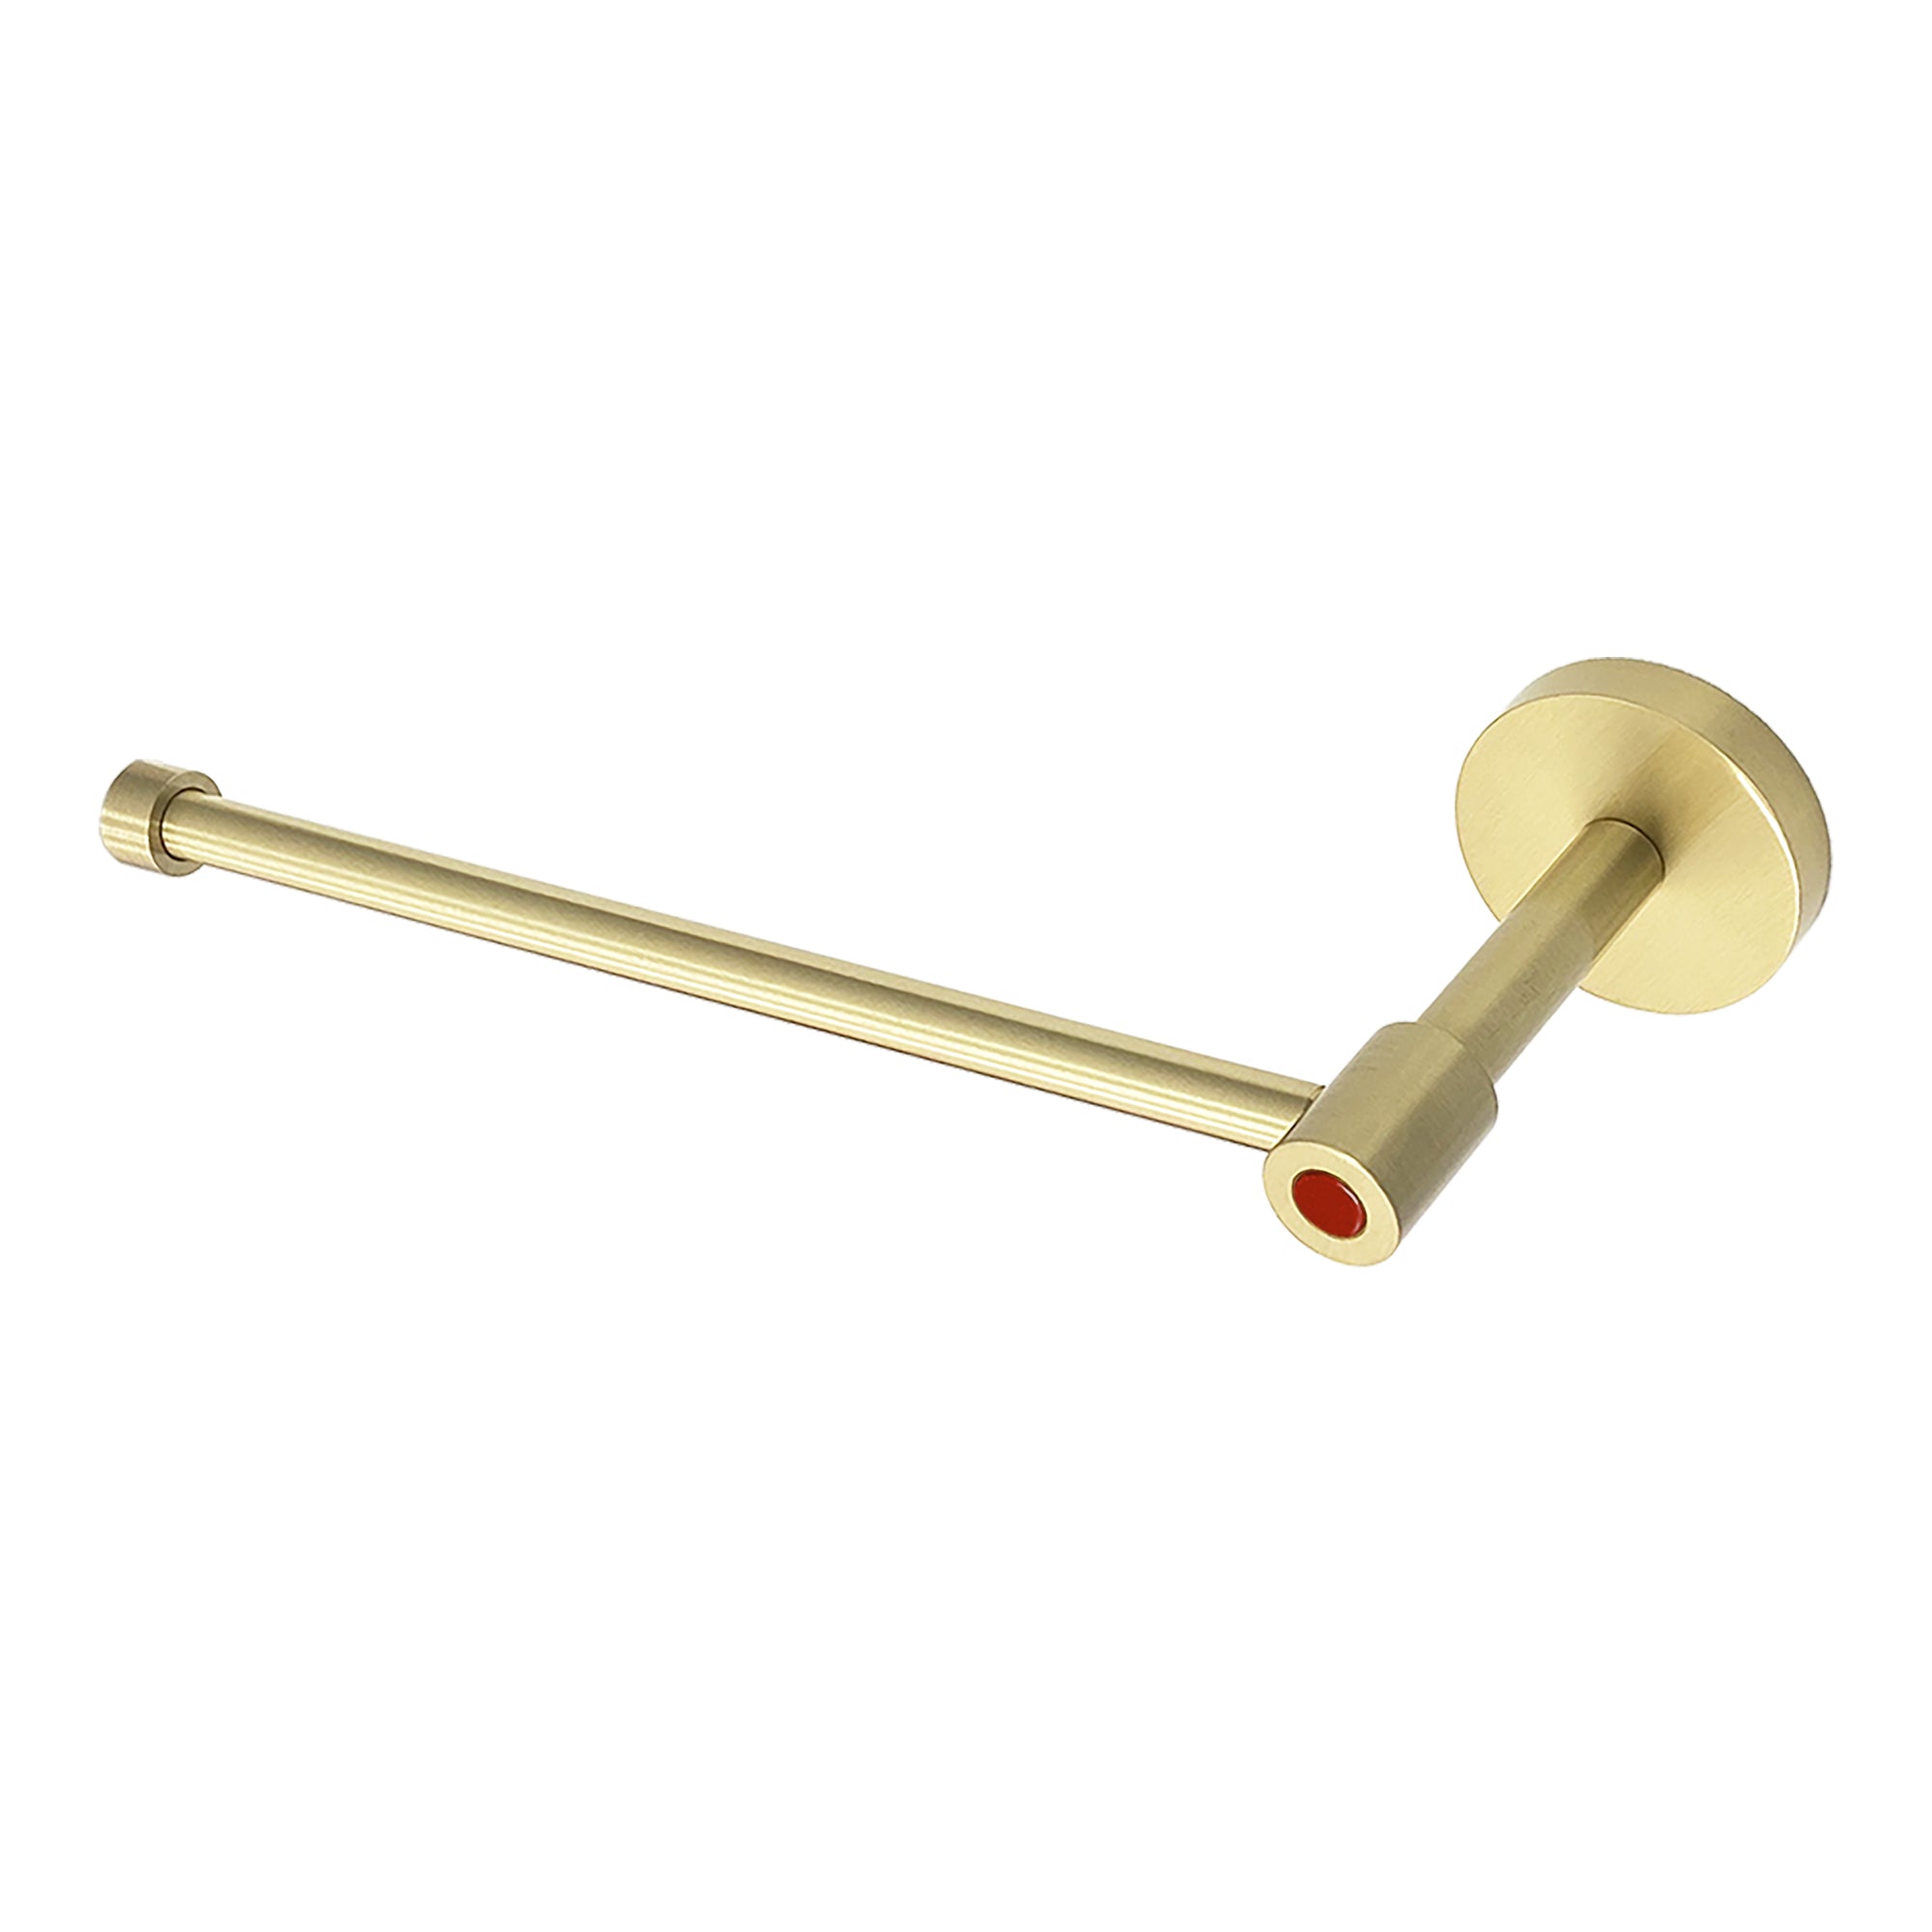 Brass and riding hood red color Head hand towel bar Dutton Brown hardware